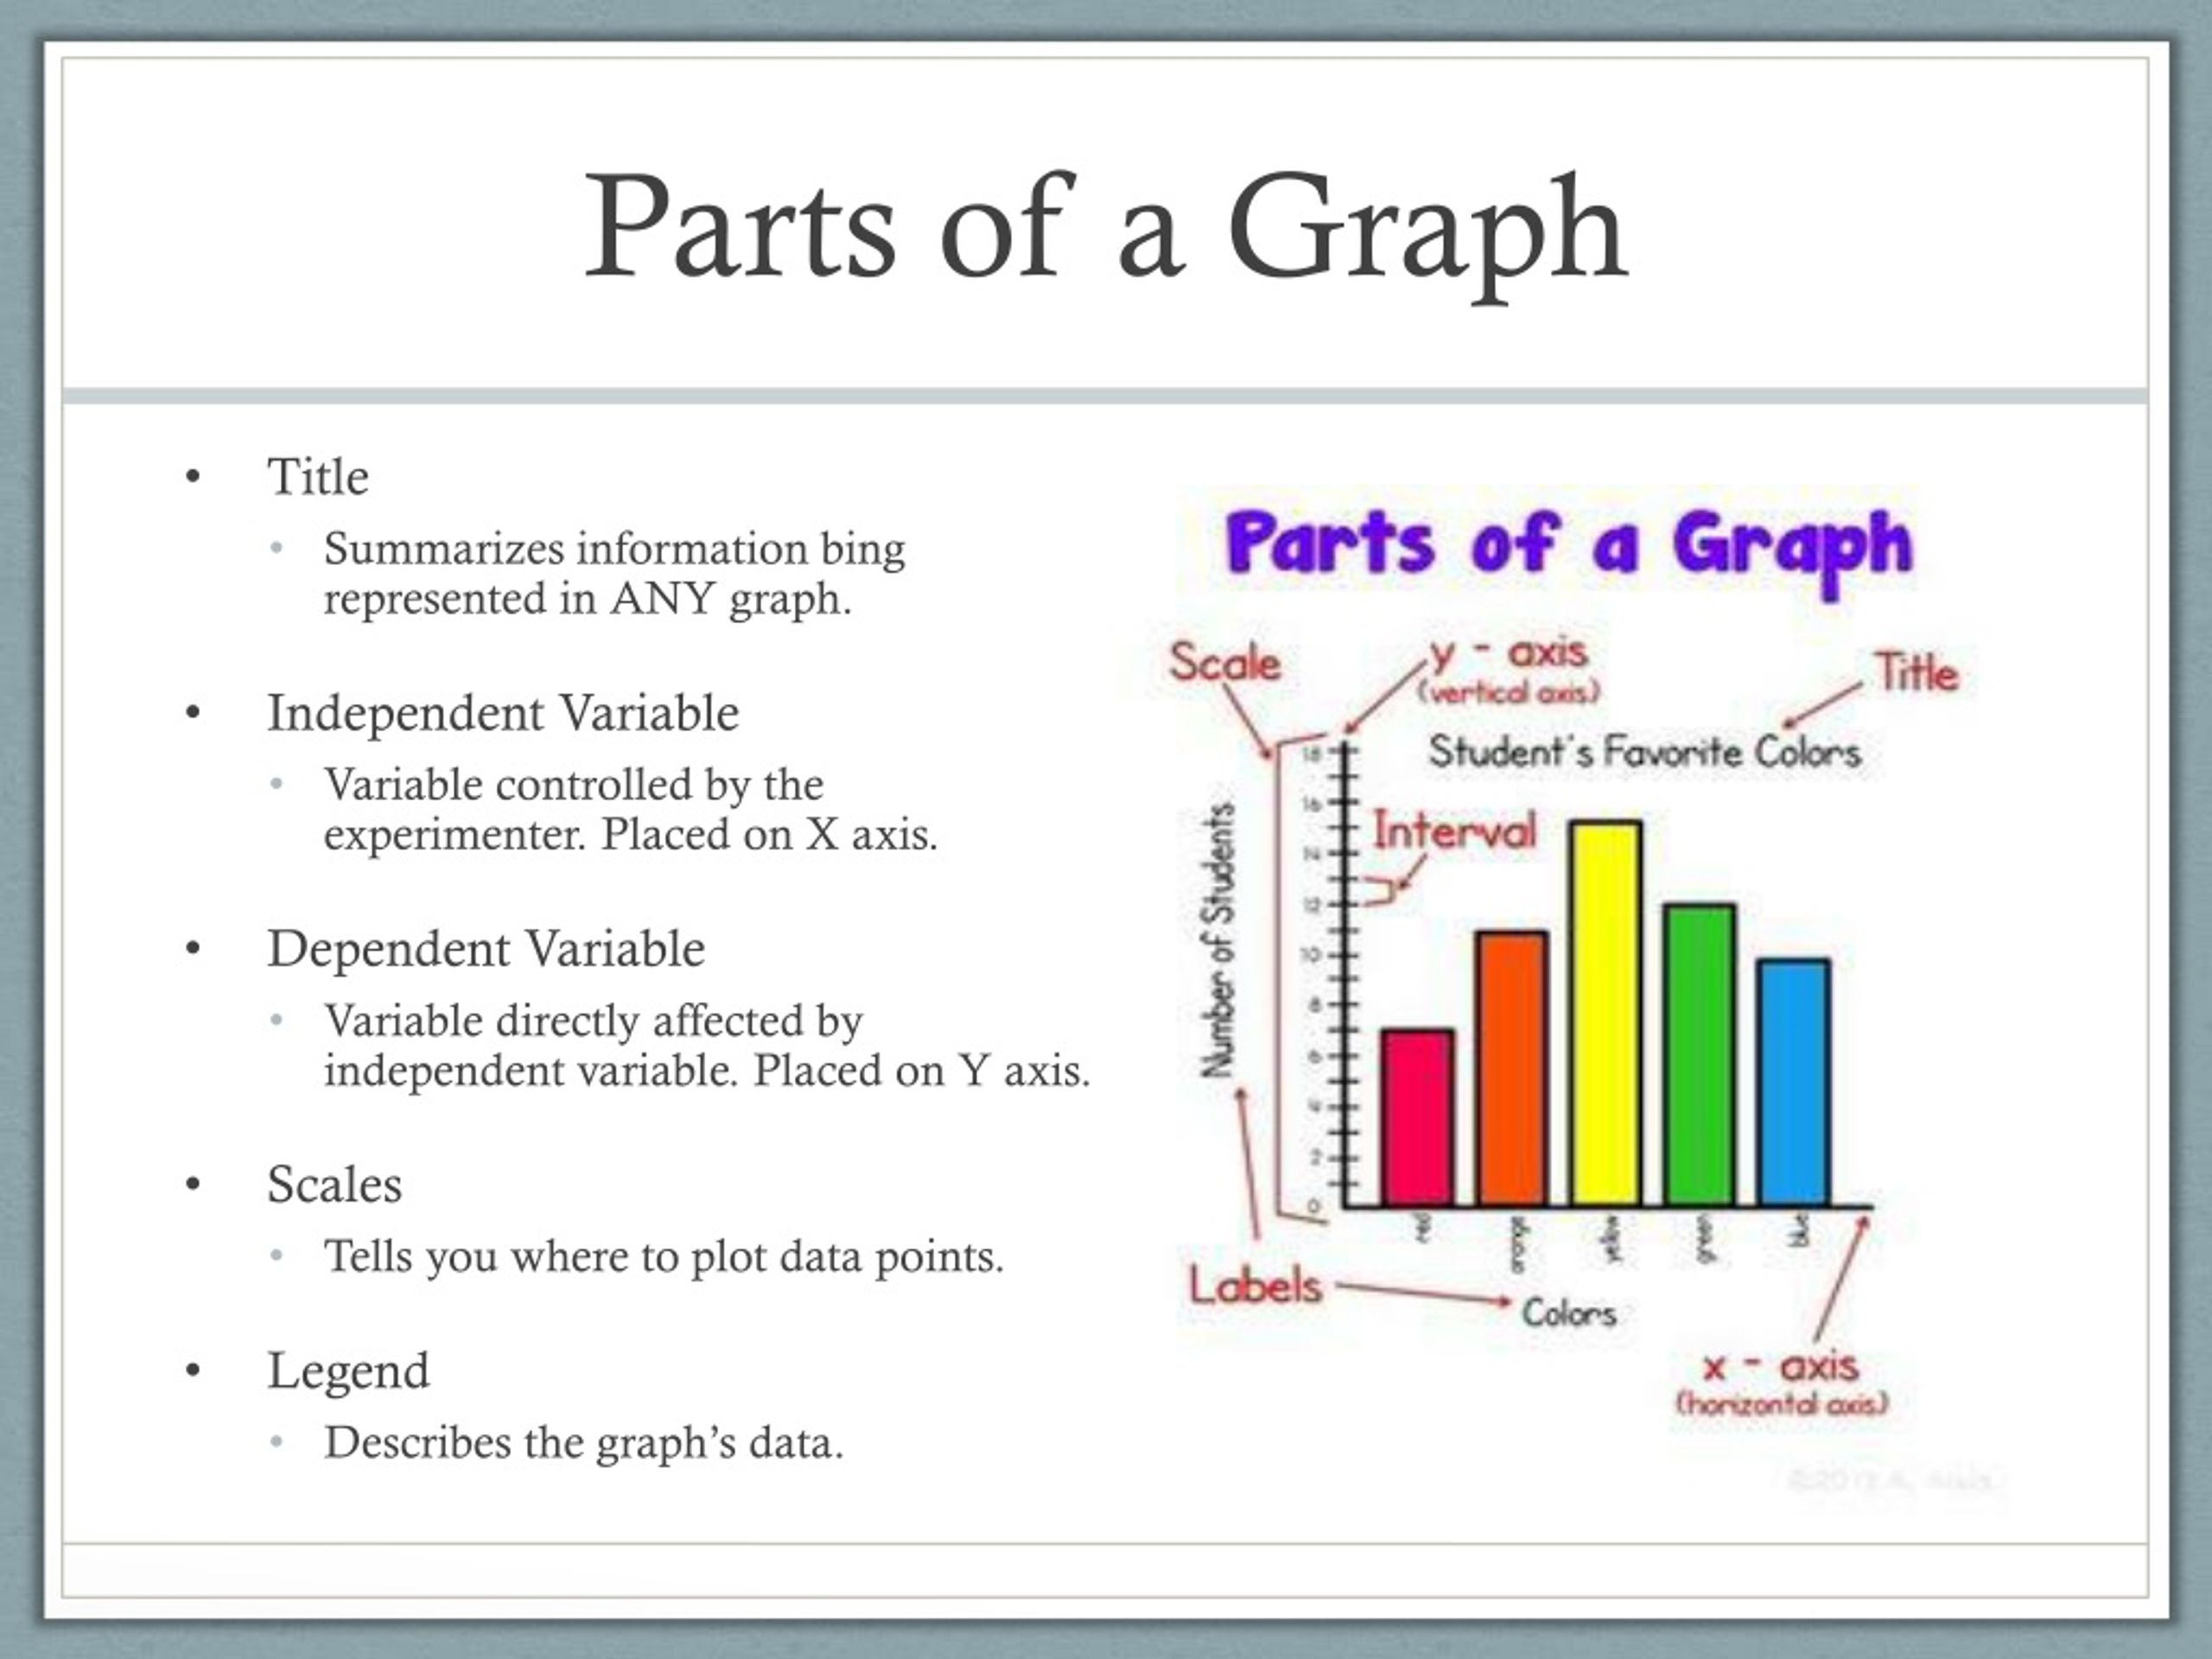 PPT - Graphing and Analyzing Scientific Data PowerPoint Presentation ...